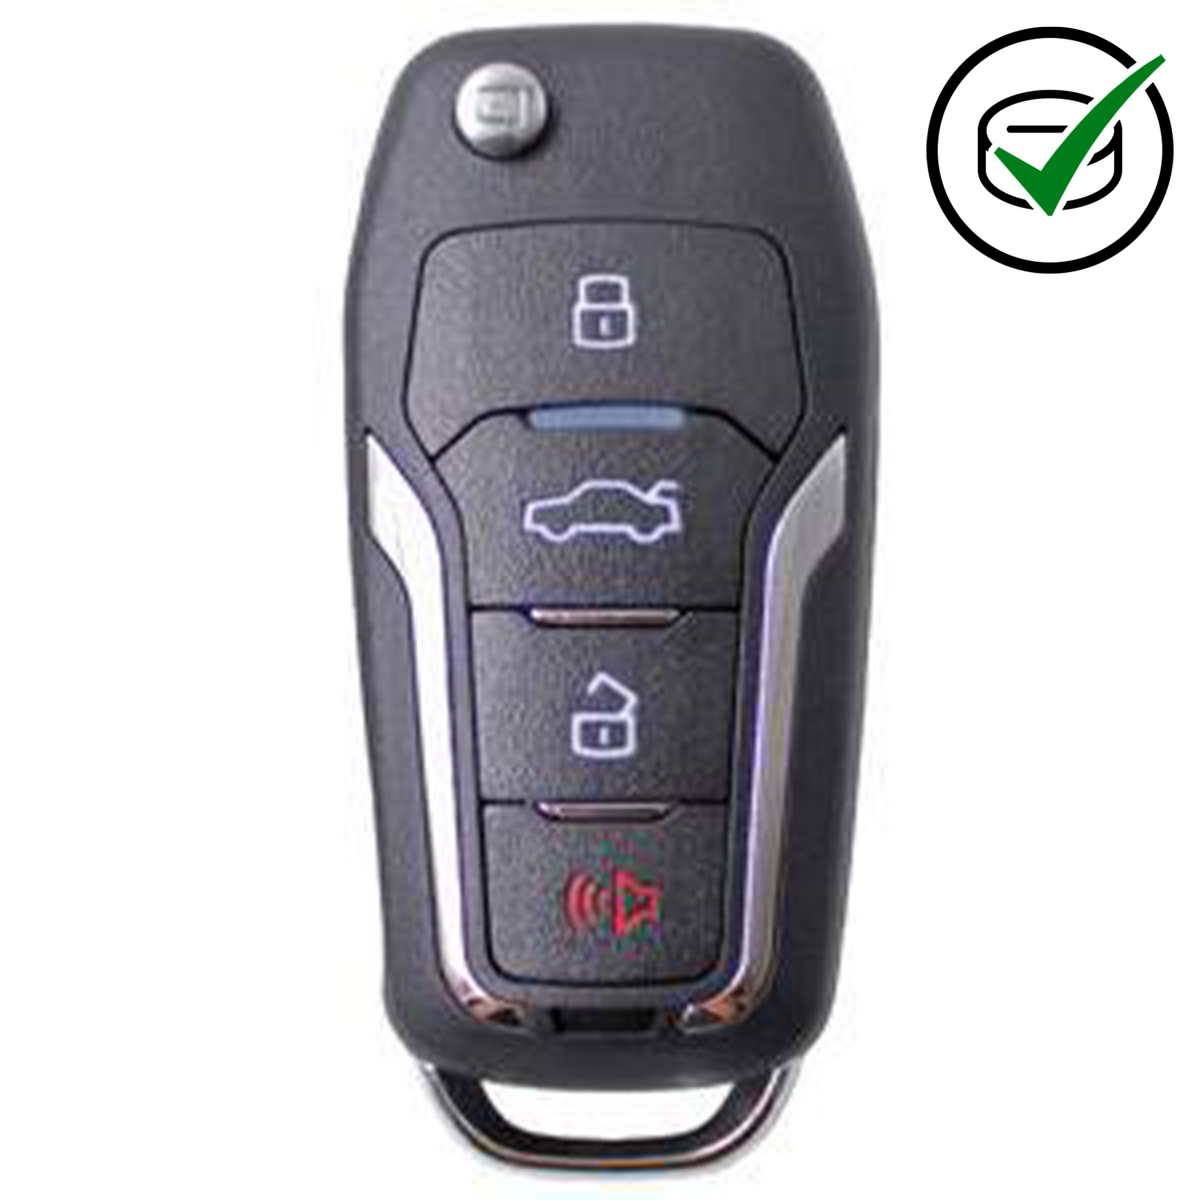 KD 900 Key remote 4 button Ford Style